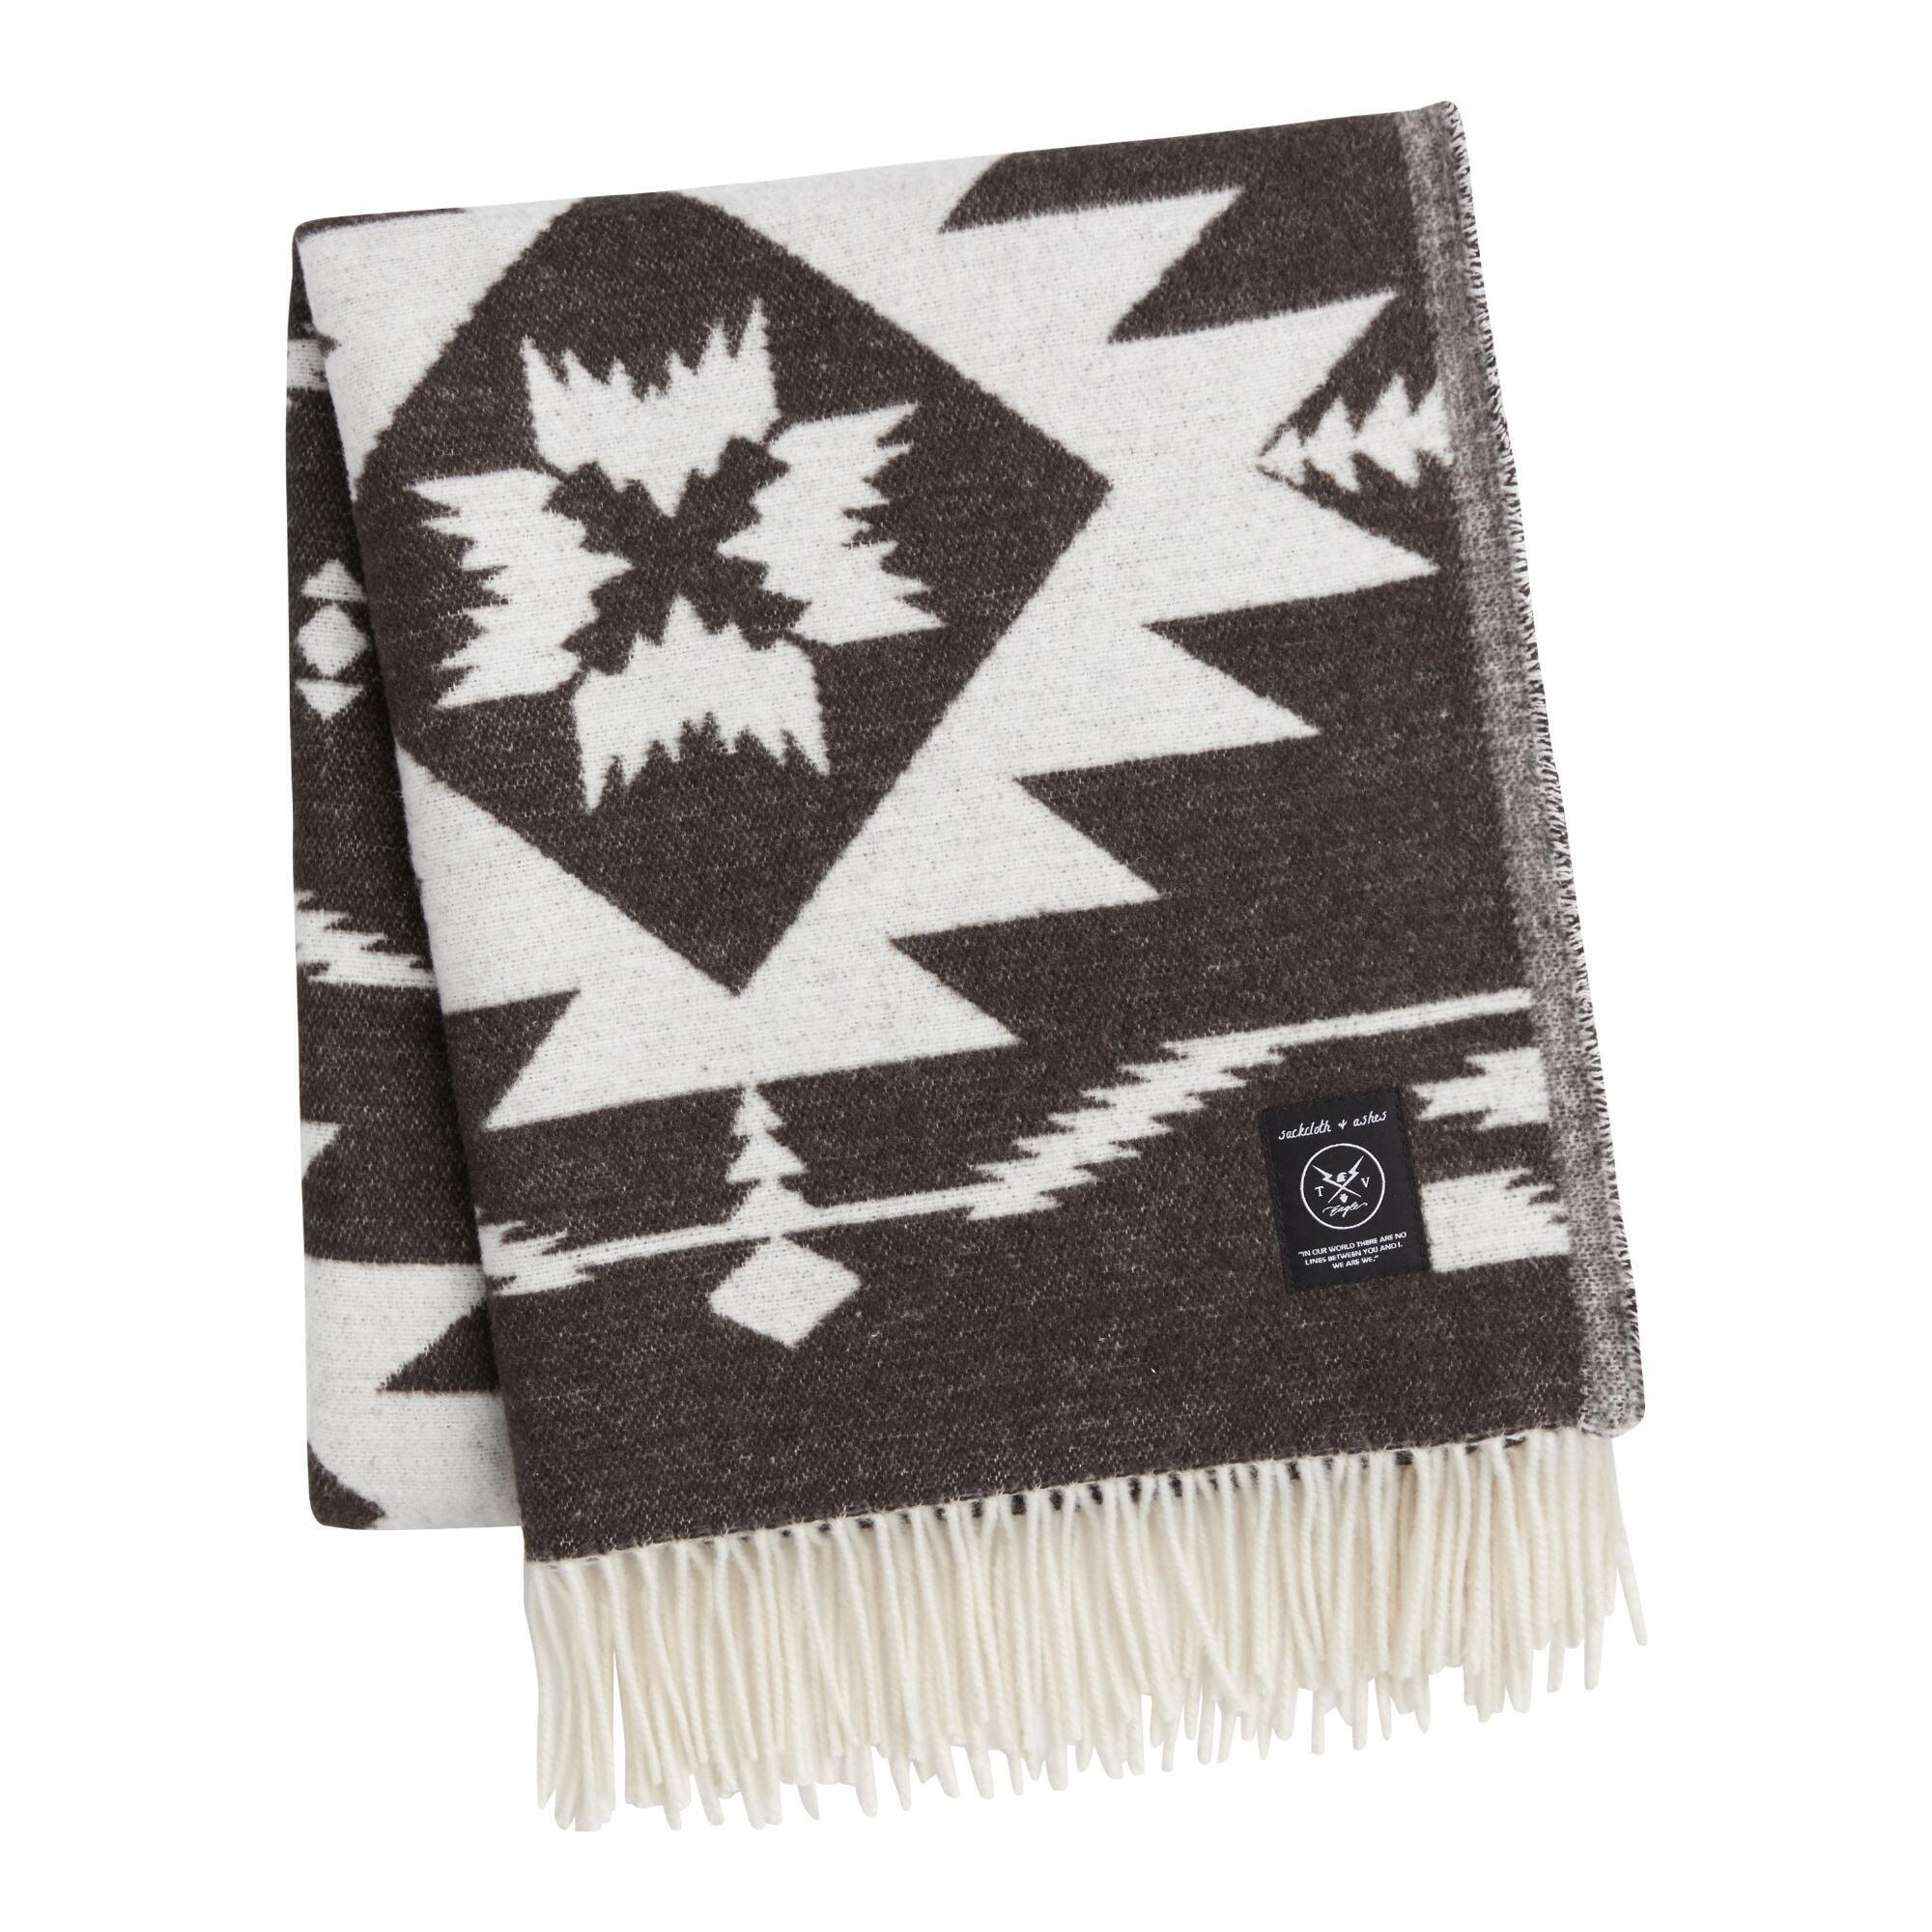 Sackcloth & Ashes Black and White Heritage Throw Blanket: Blue/Brown/Red/Multi - Acrylic by World Market